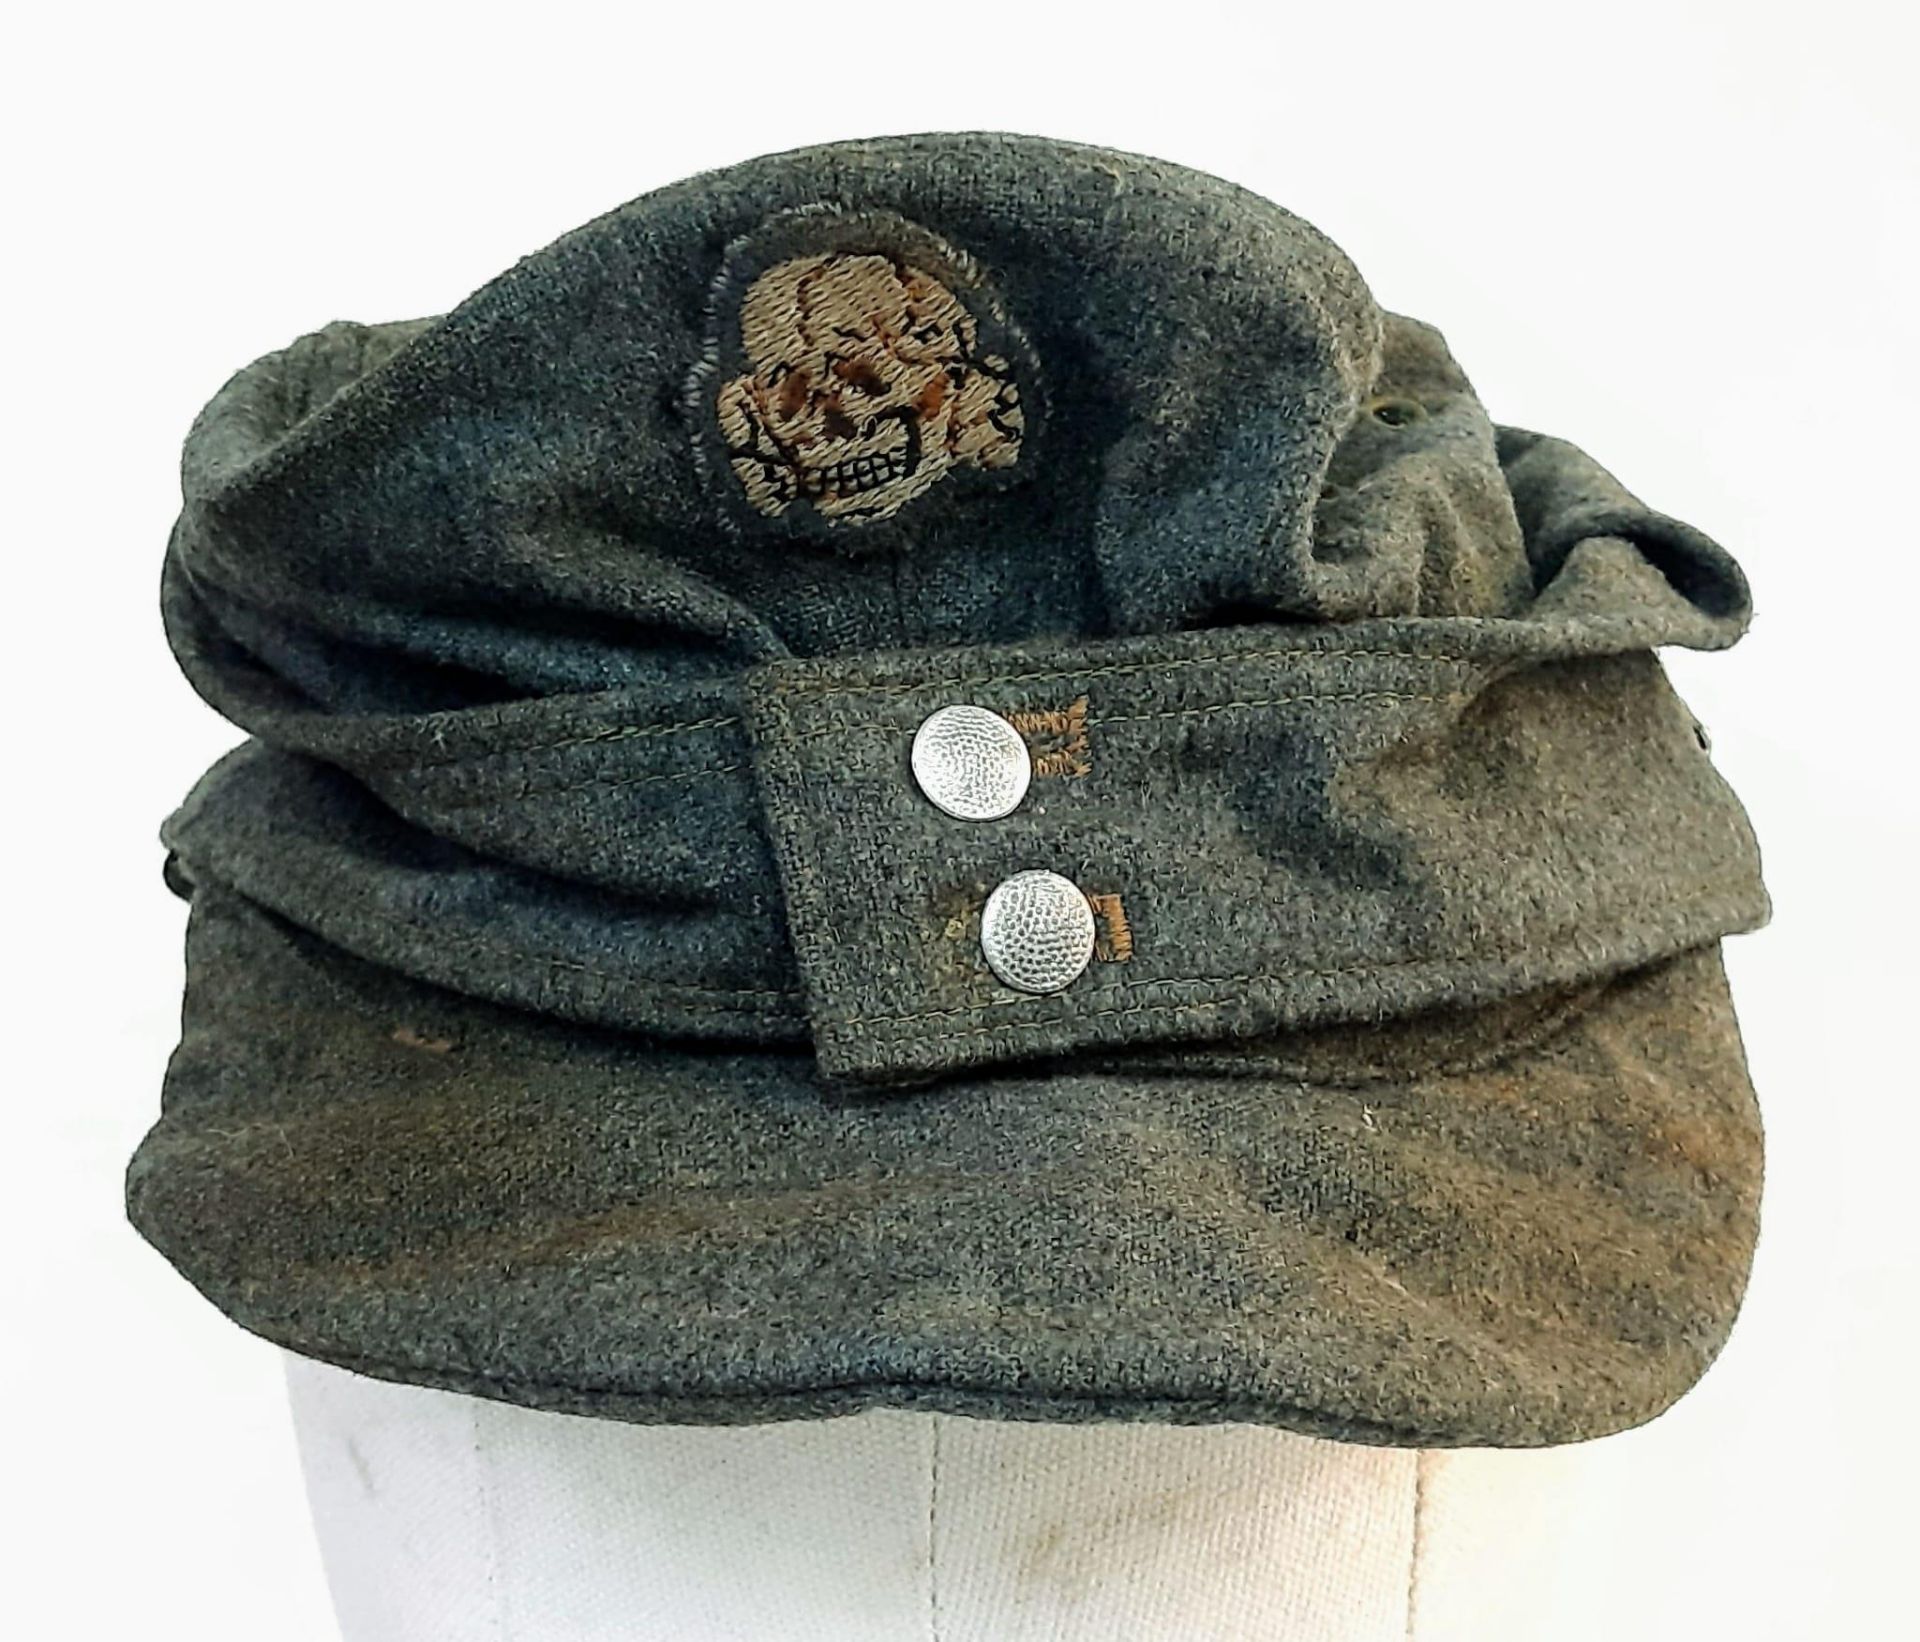 3 rd Reich Waffen SS M34 Ersatz (enonomey) “Blanket” Cap. Thus named because they were made from old